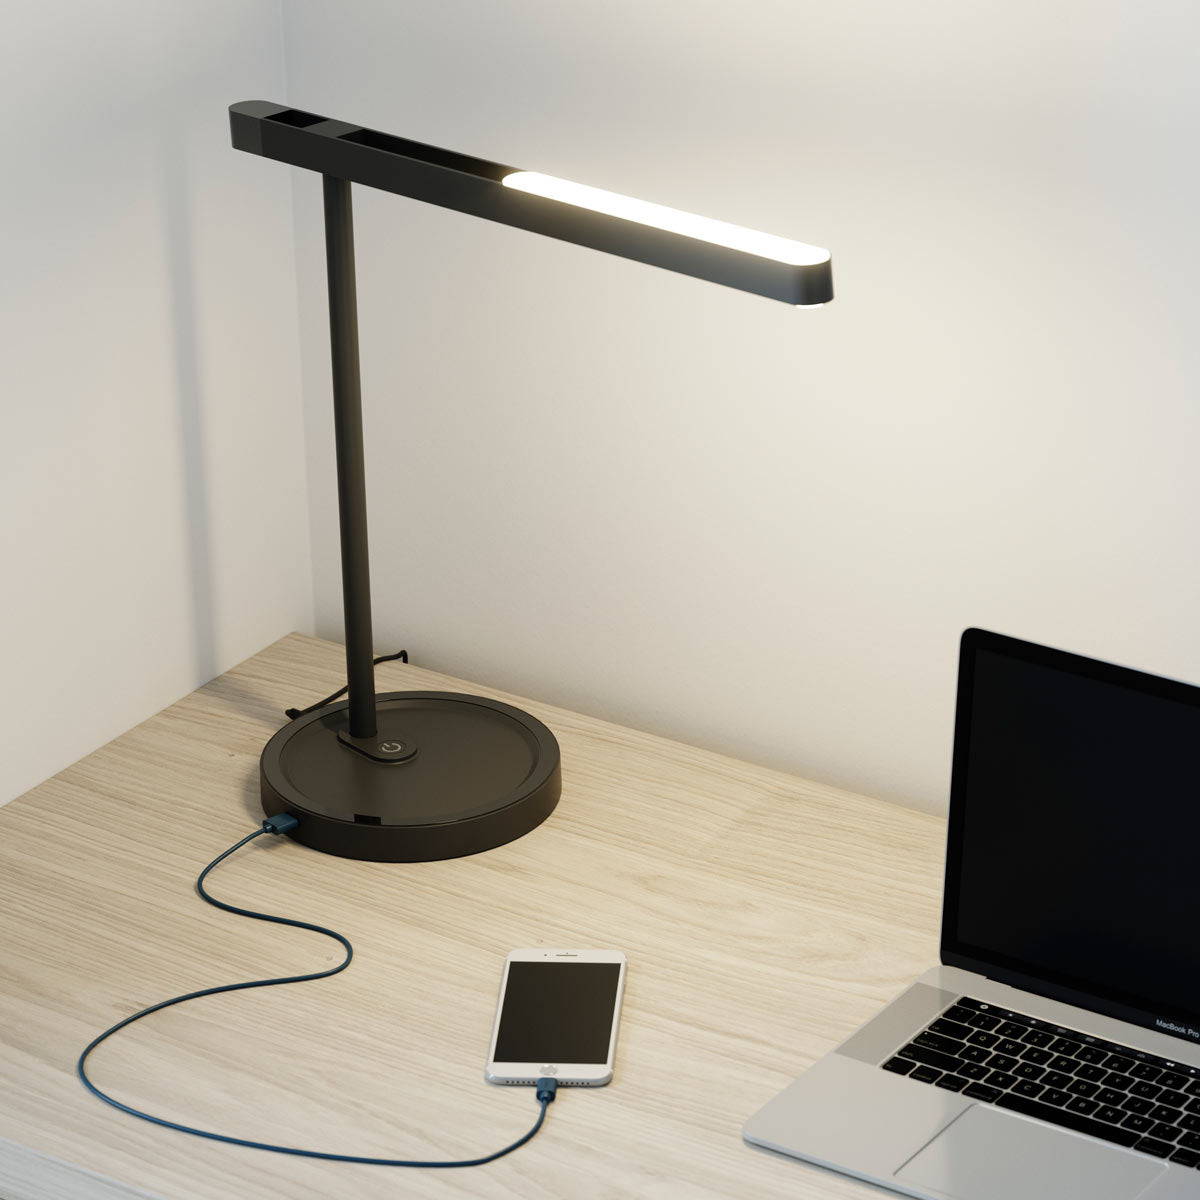 A LUX led desk lamp charges a smartphone on a computer desk.